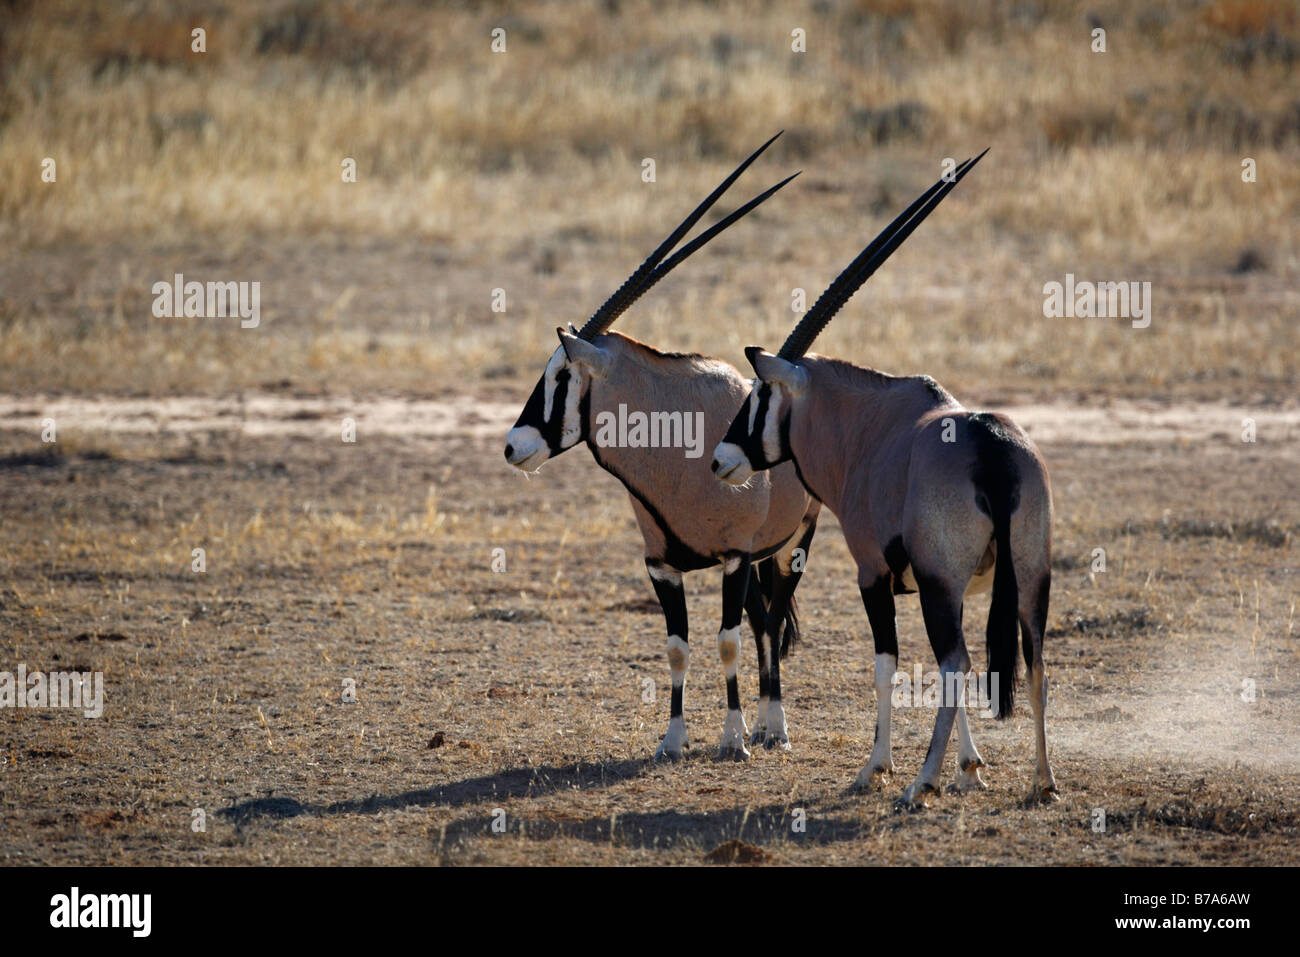 Two gemsbok (Oryx) standing next to one another looking in the same direction Stock Photo